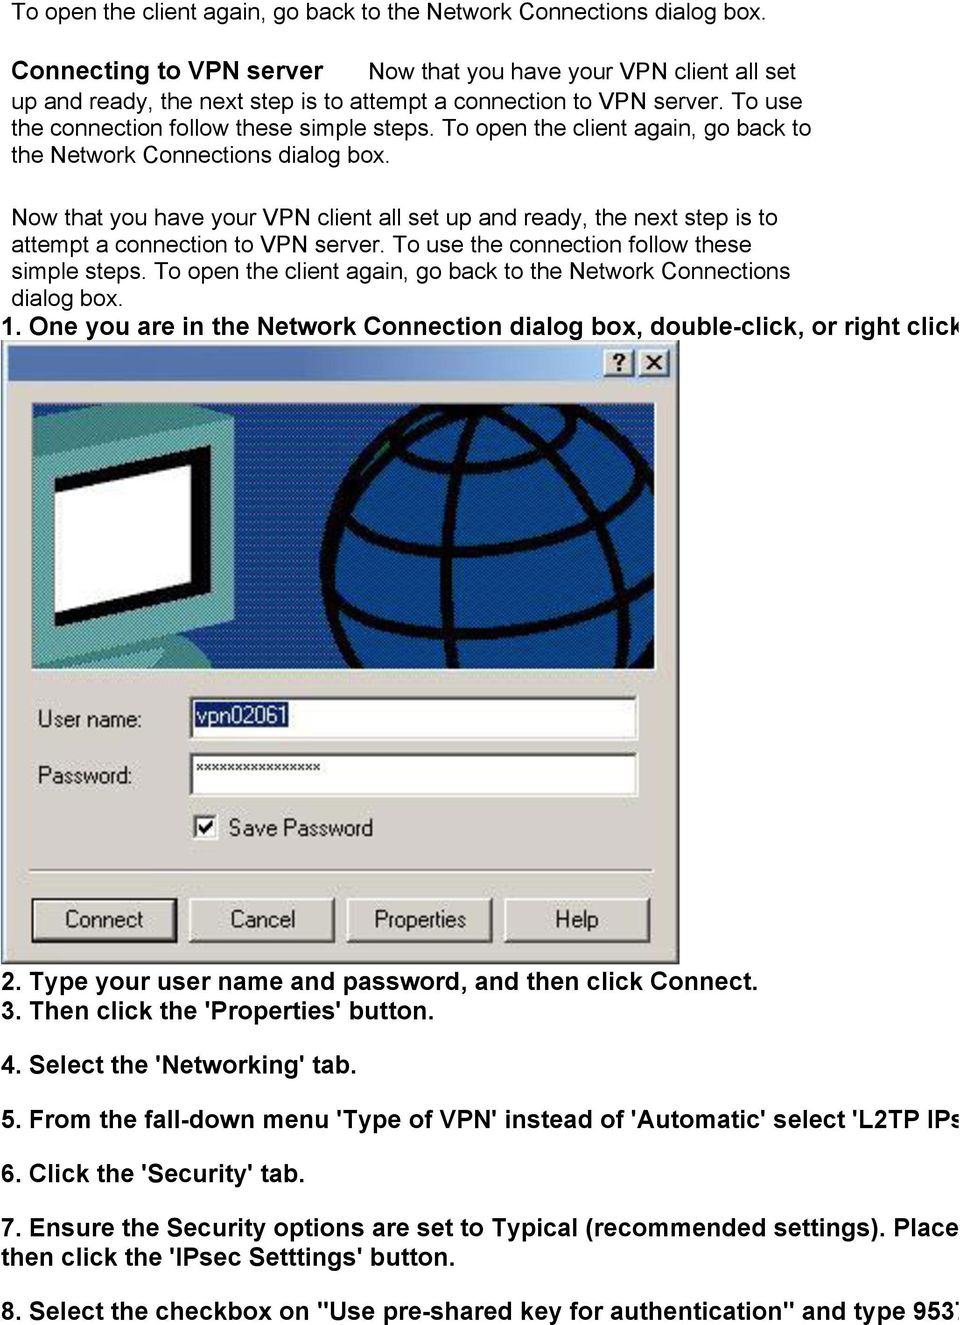 Now that you have your VPN client all set up and ready, the next step is to attempt a connection to VPN server. To use the connection follow these simple steps.  1.